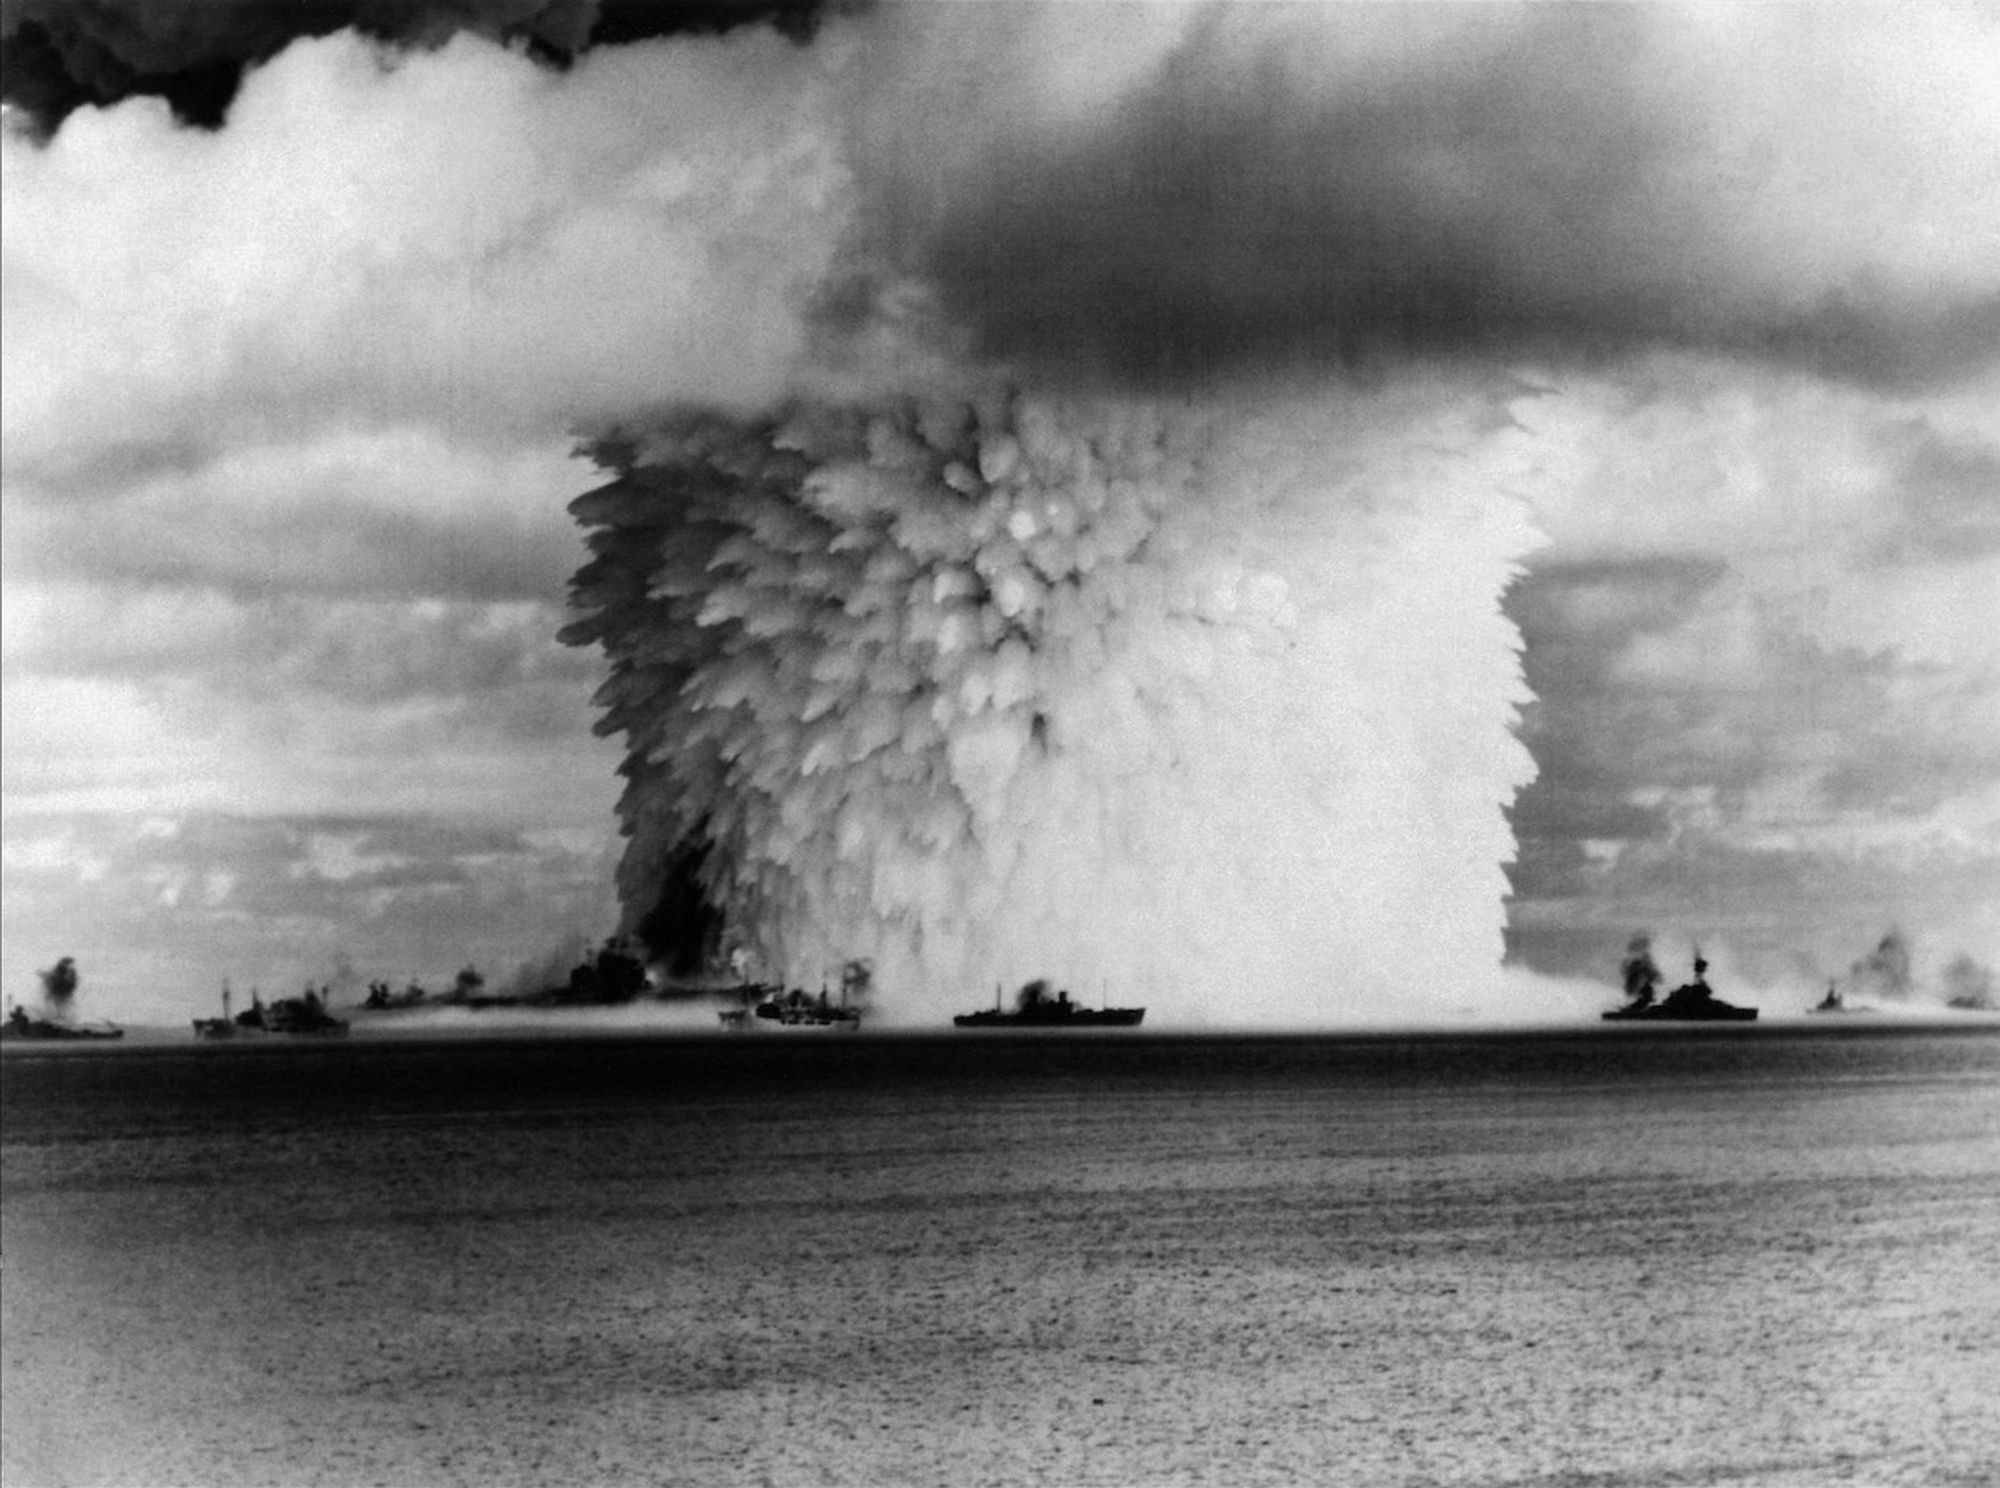 Crossroads Baker nuclear weapons test, 26 July 1946: view taken from Eneu island ten seconds after the weapon was fired. The aircraft carrier USS Saratoga (CV-3) is visible in the left foreground, being lifted out of the water. 